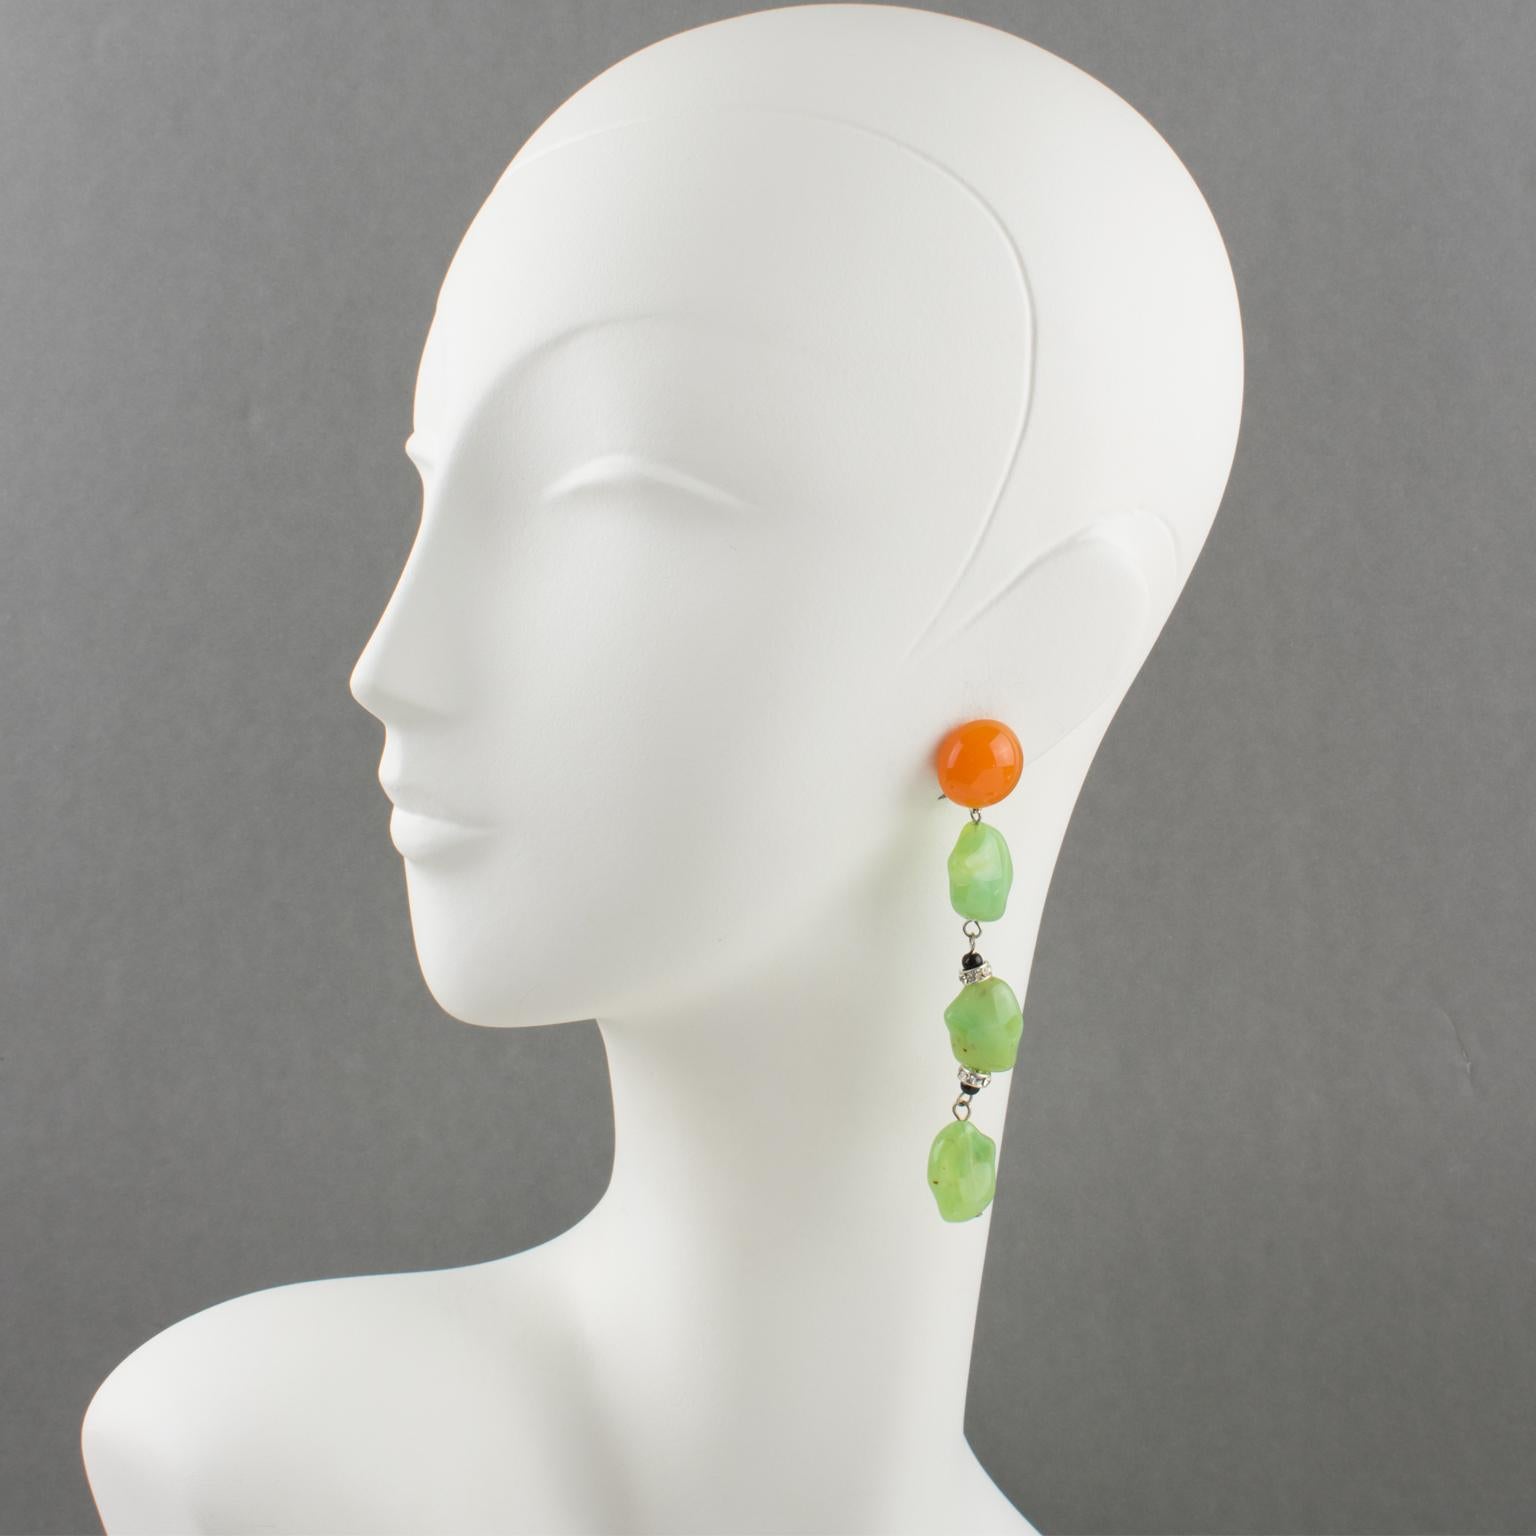 These elegant Angela Caputi resin clip-on earrings were made in Italy. The dangling pebble shape is built with a tangerine orange color contrasted with faux-jade green color beads and complimented with crystal rhinestone spacer rings.
As you know,